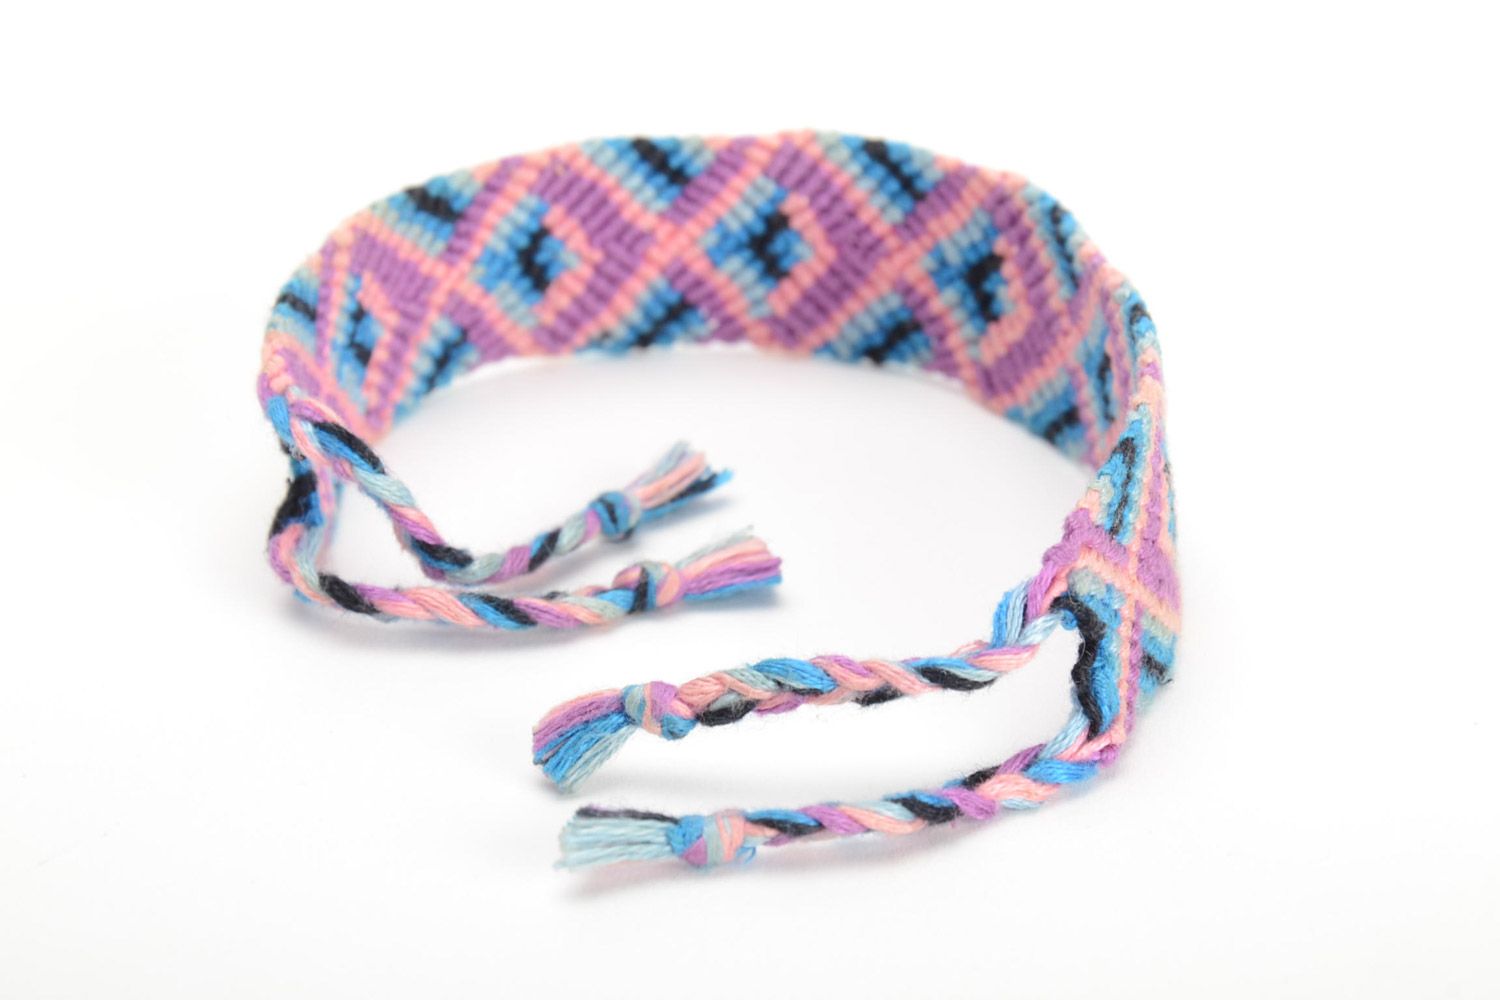 Handmade friendship wrist bracelet woven of threads with bright ornament and ties photo 3